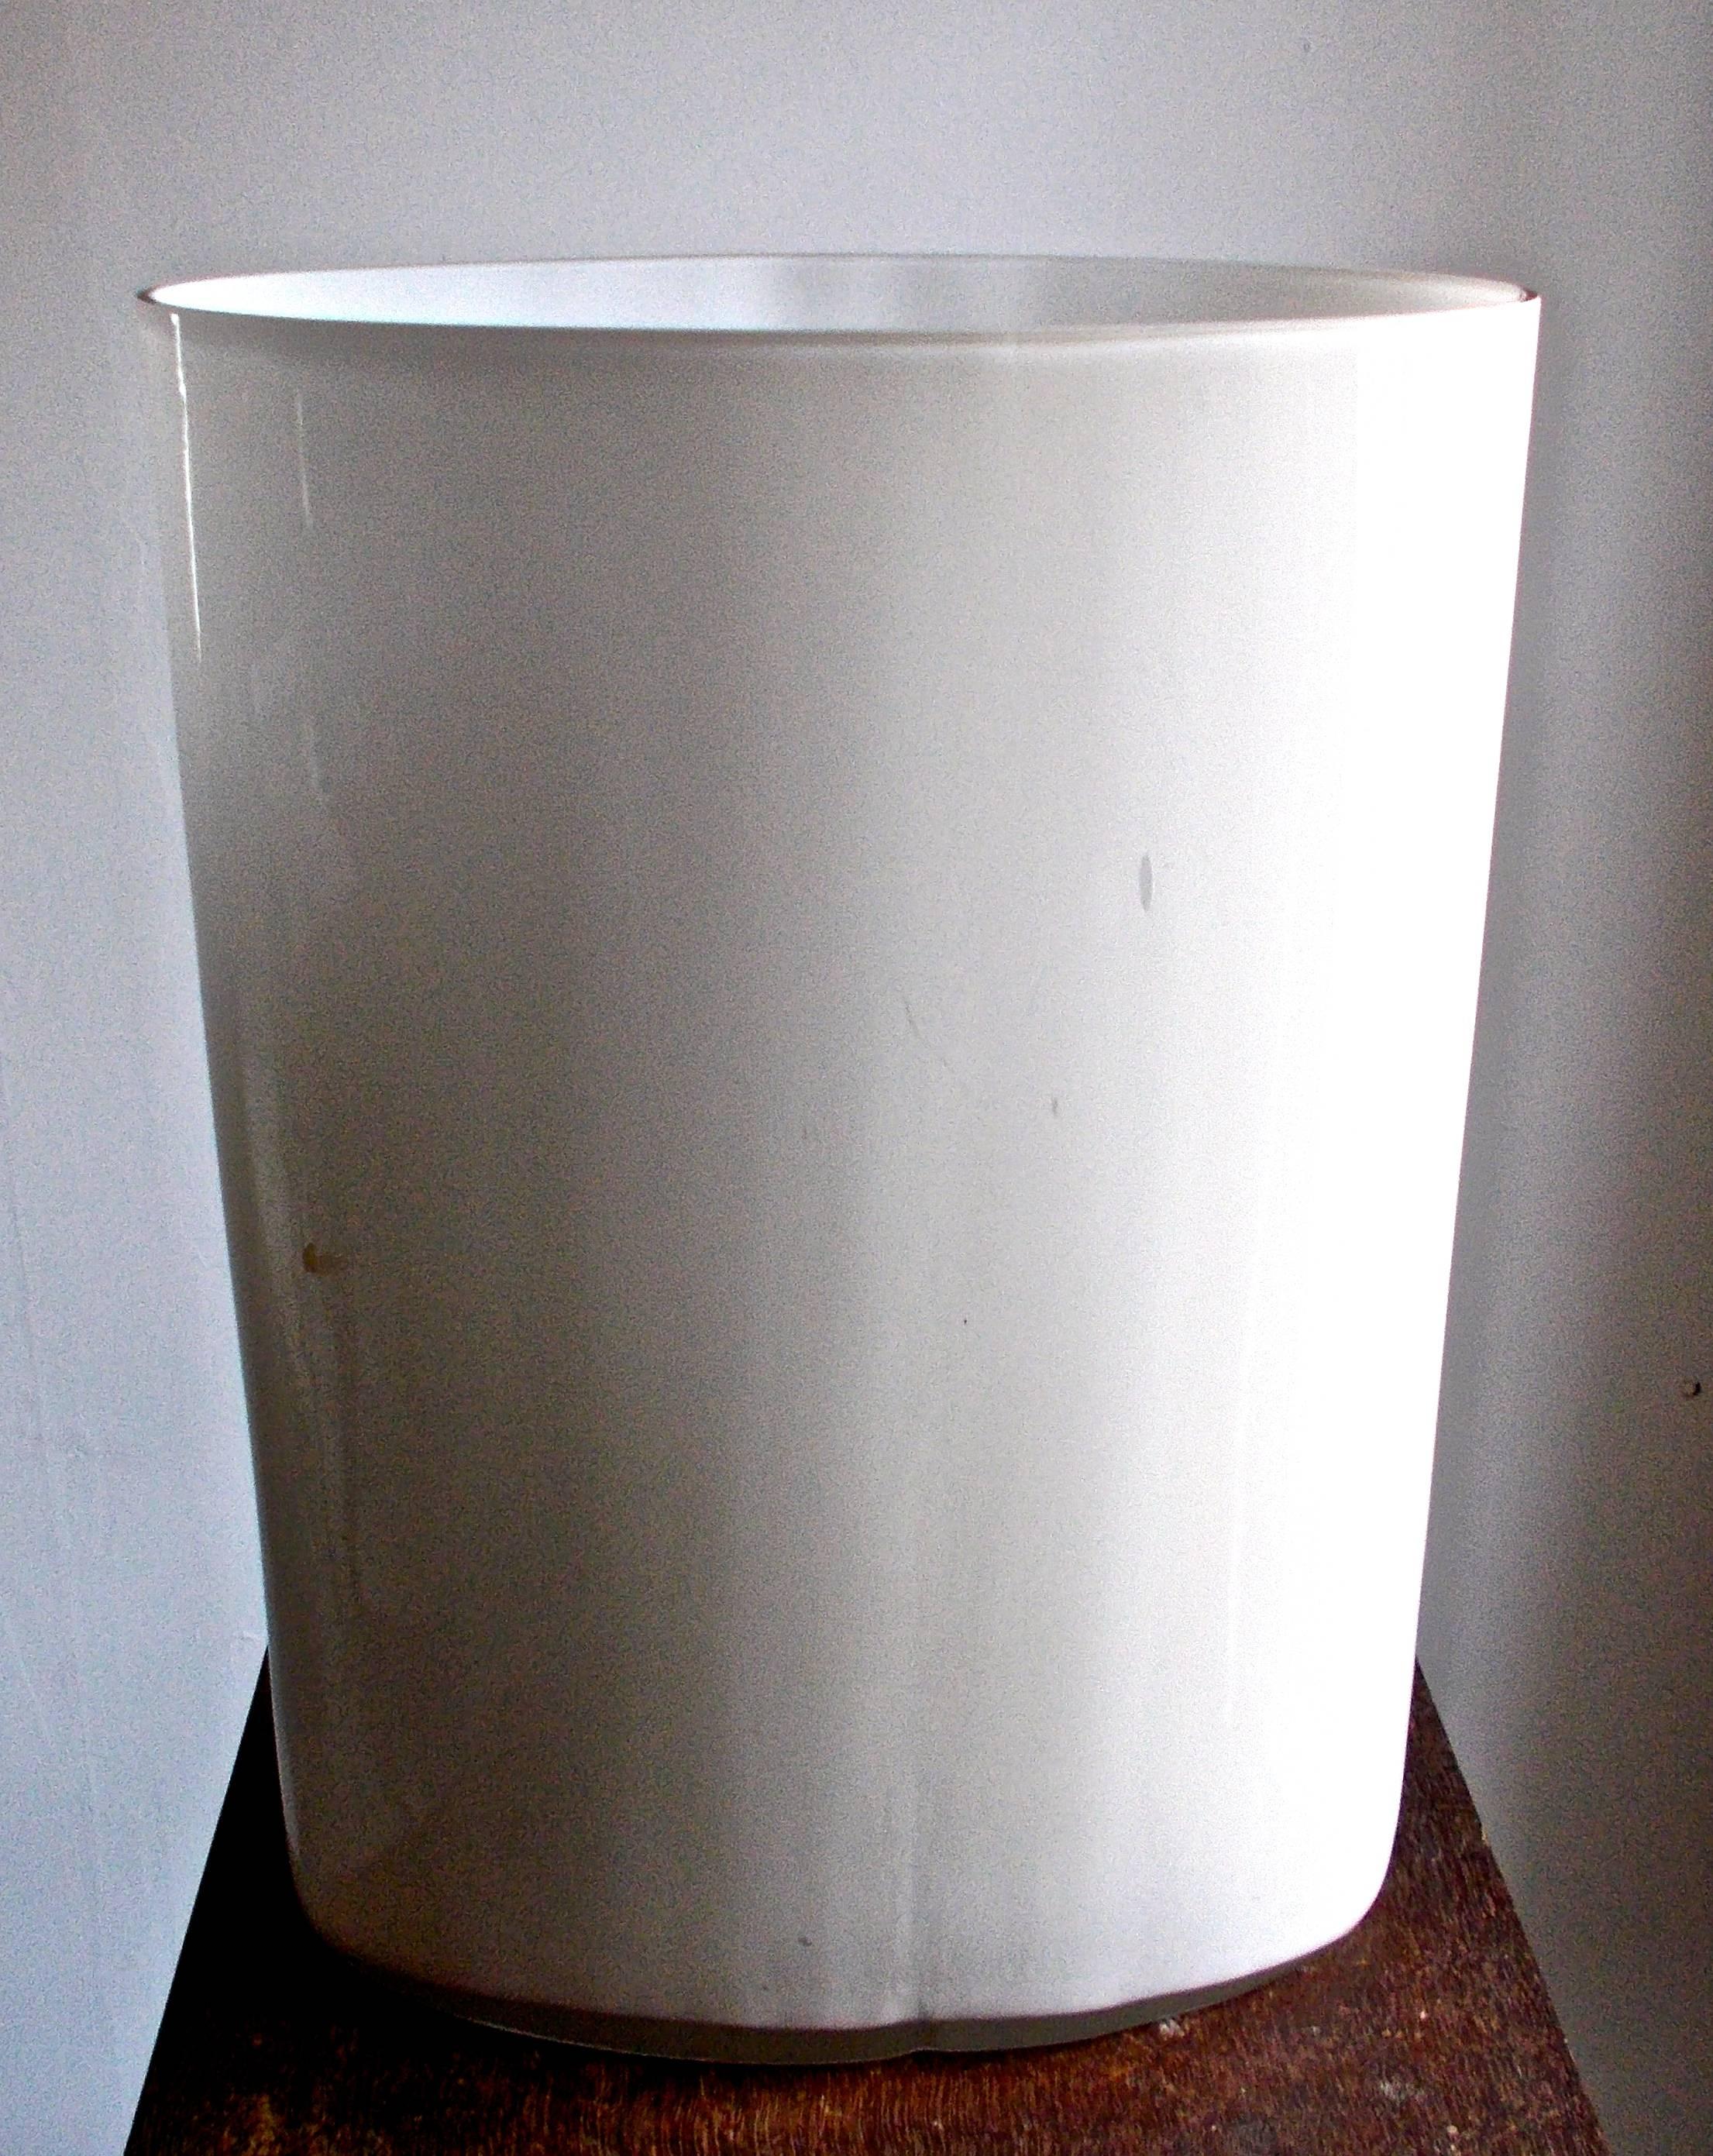 The largest version of this famous form. Opaque white and clear glass. Measures: 35 cm. (13 3/4